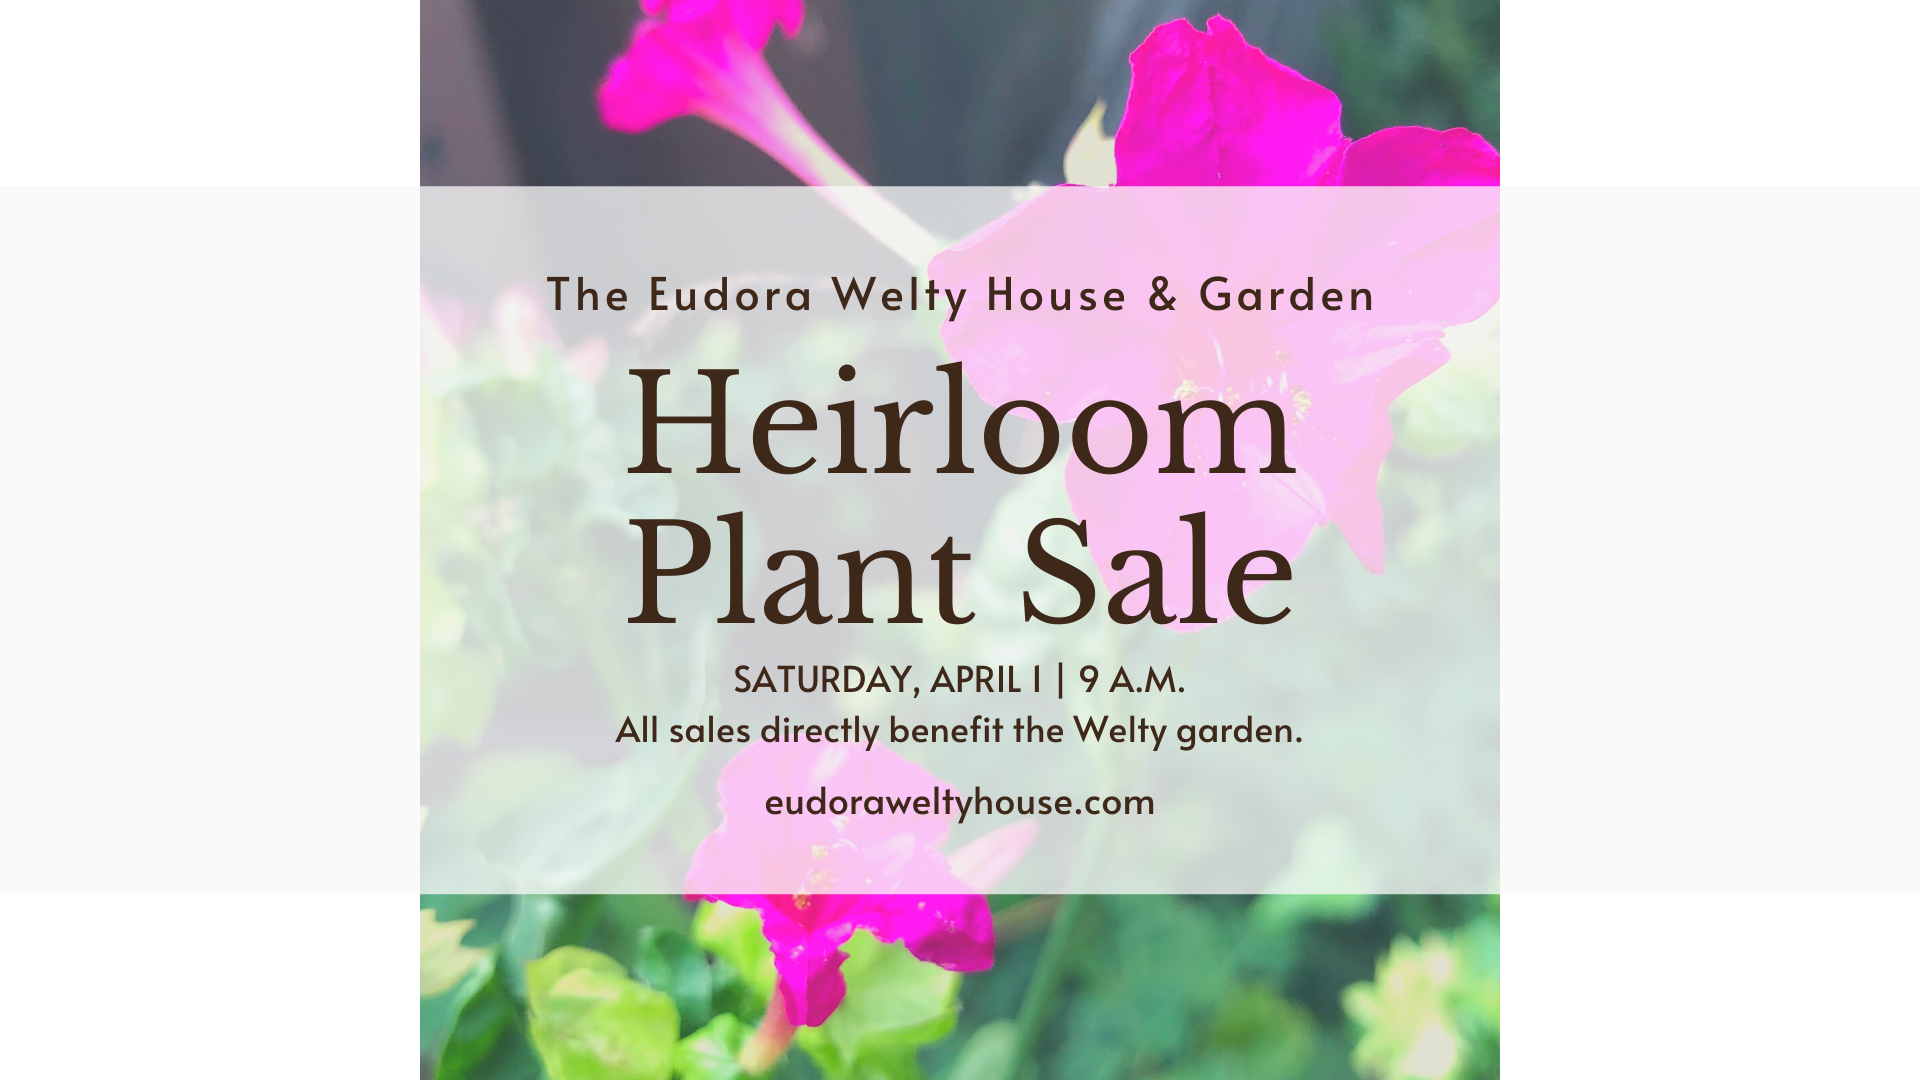 Poster for Heirloom Plant Sale Saturday, April 1, 2023, brown text in a light field, with four o'clock flowers behind